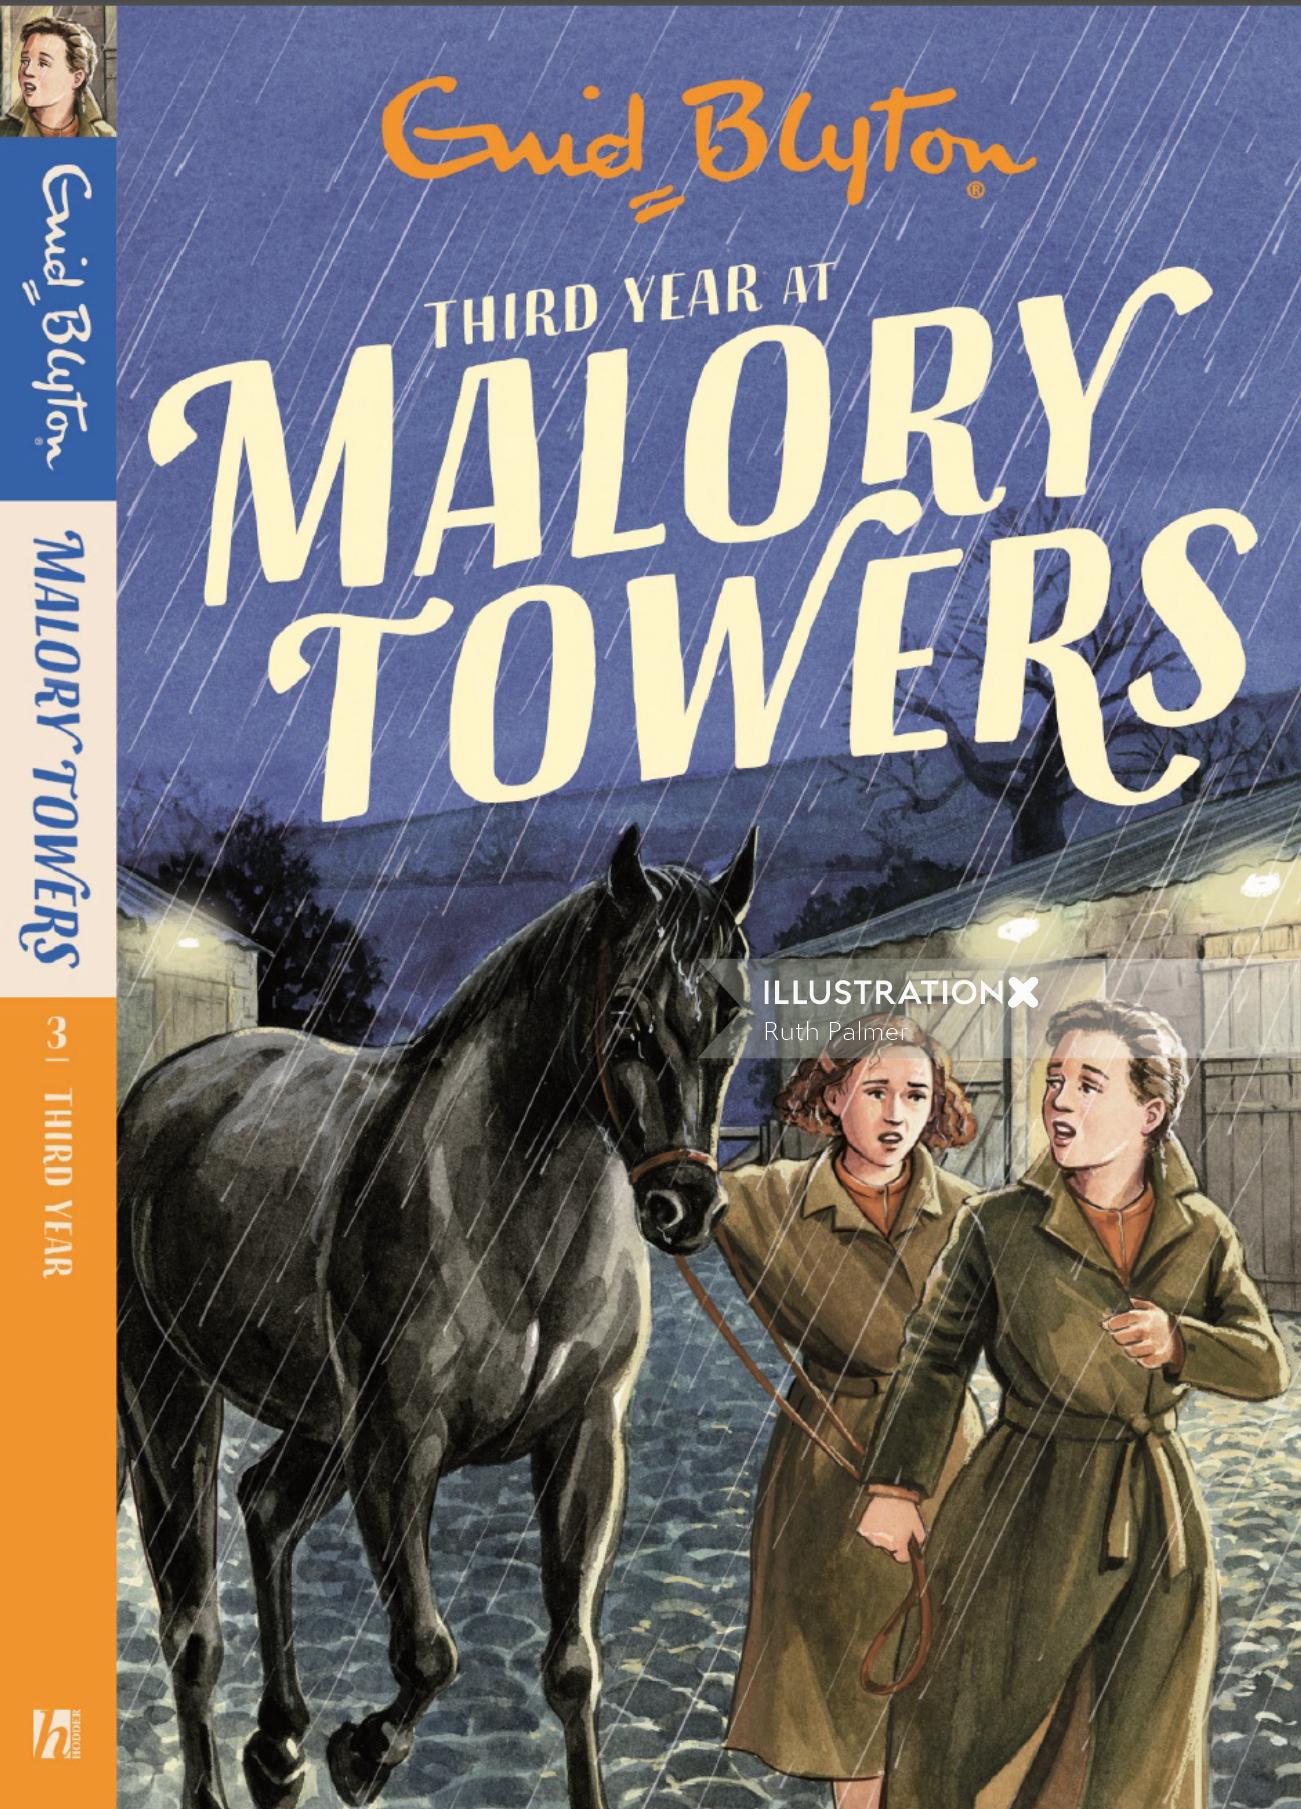 Third year at malory towers book cover illustration